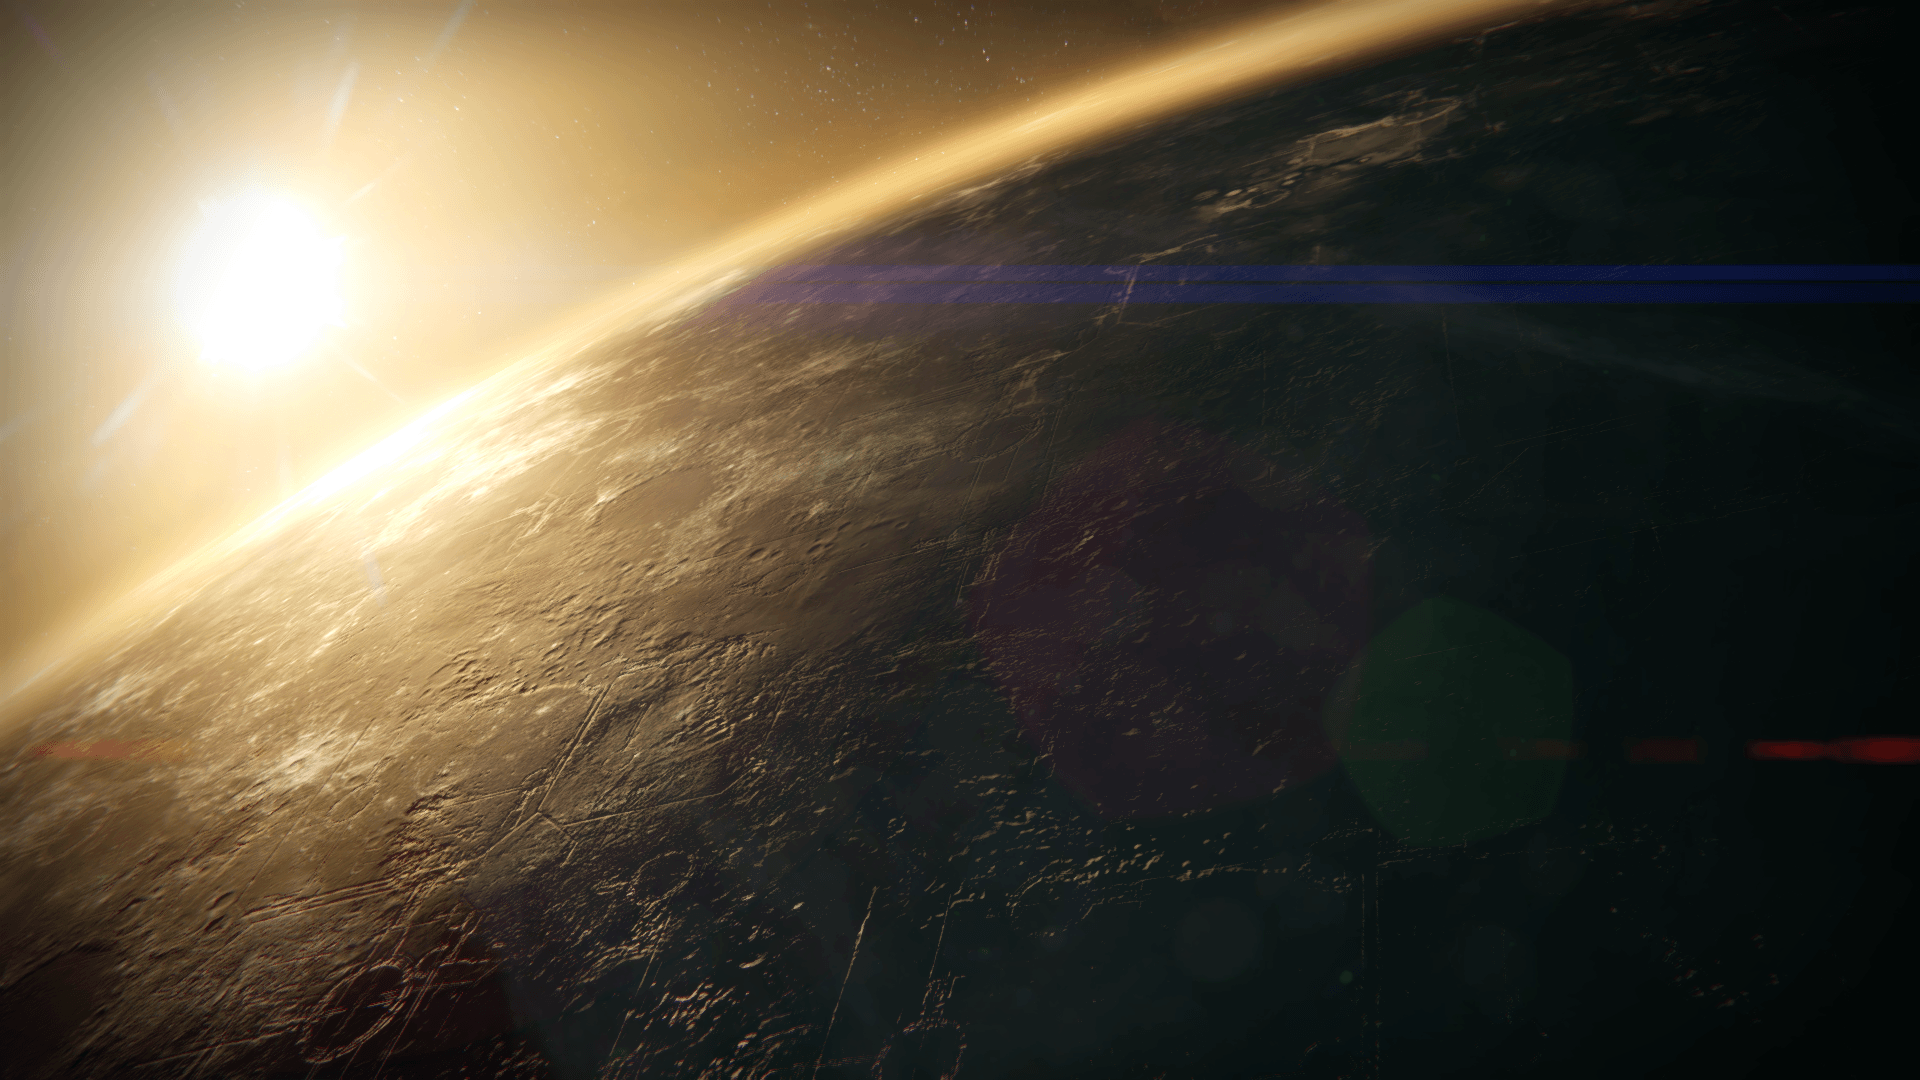 Wallpapers of the areas we can orbit DestinyTheGame